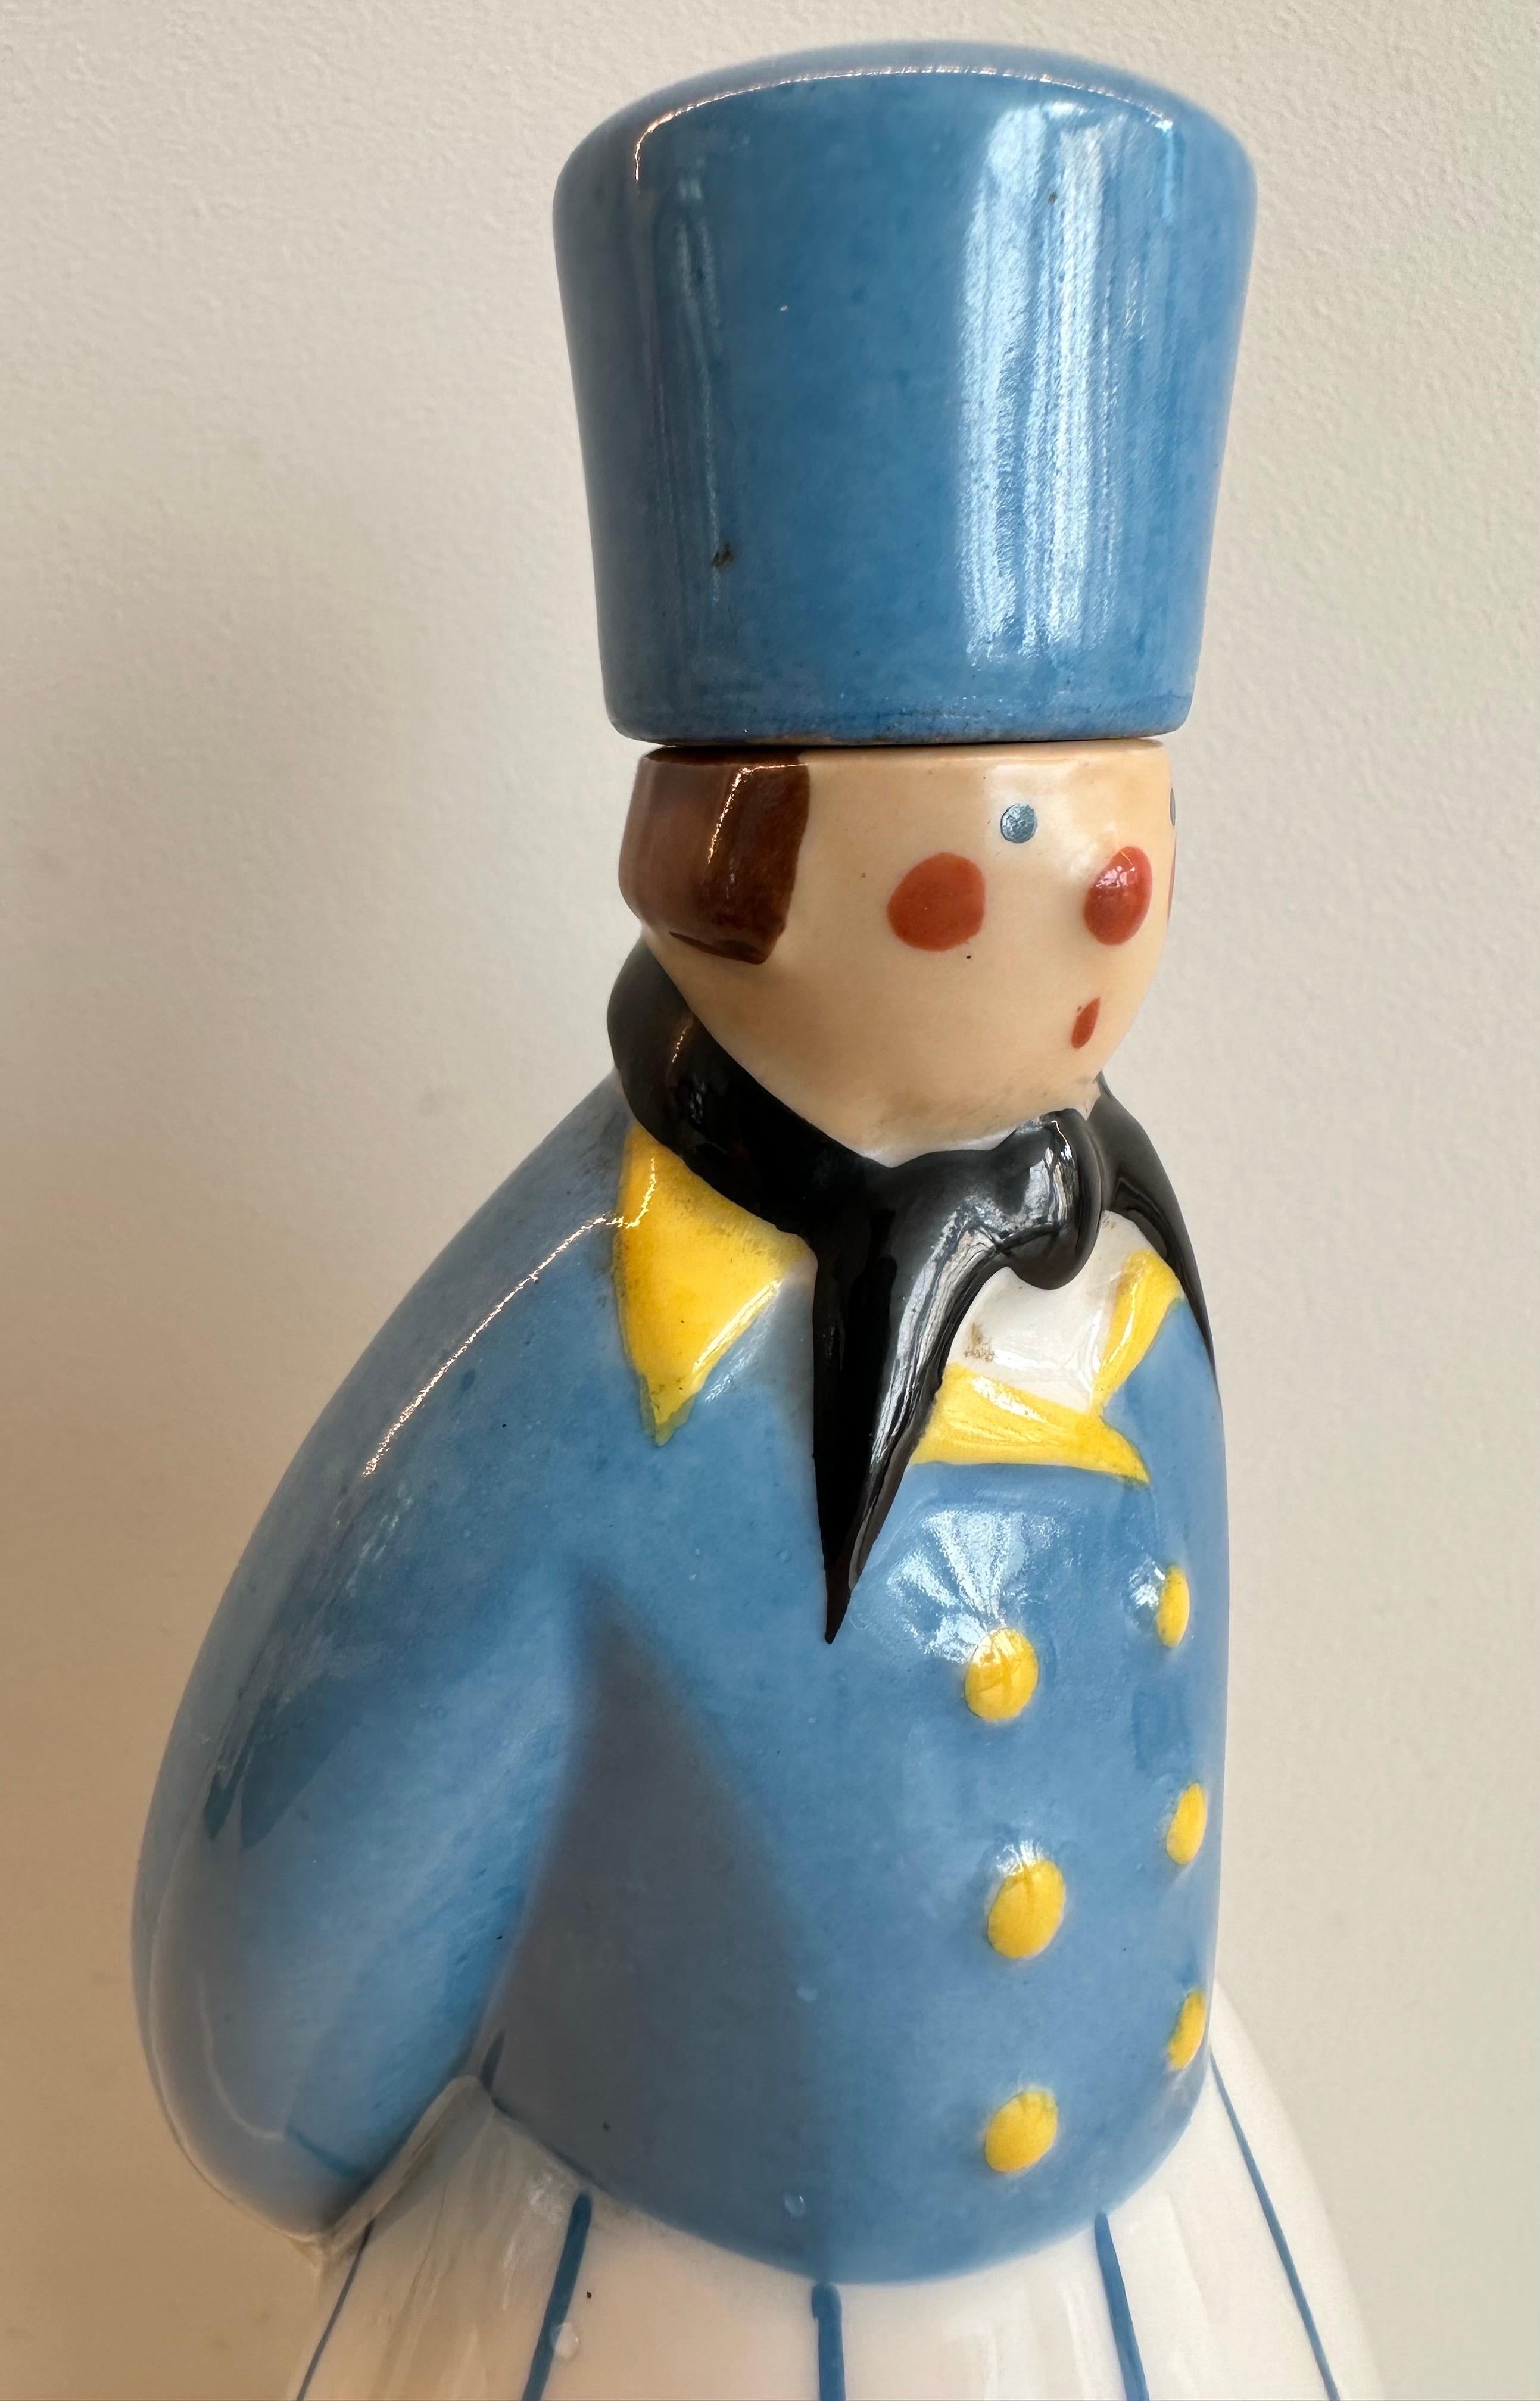 Enameled Art Deco 1930s French “Curacao” Figural Russian Soldier Flask by Robj Paris For Sale